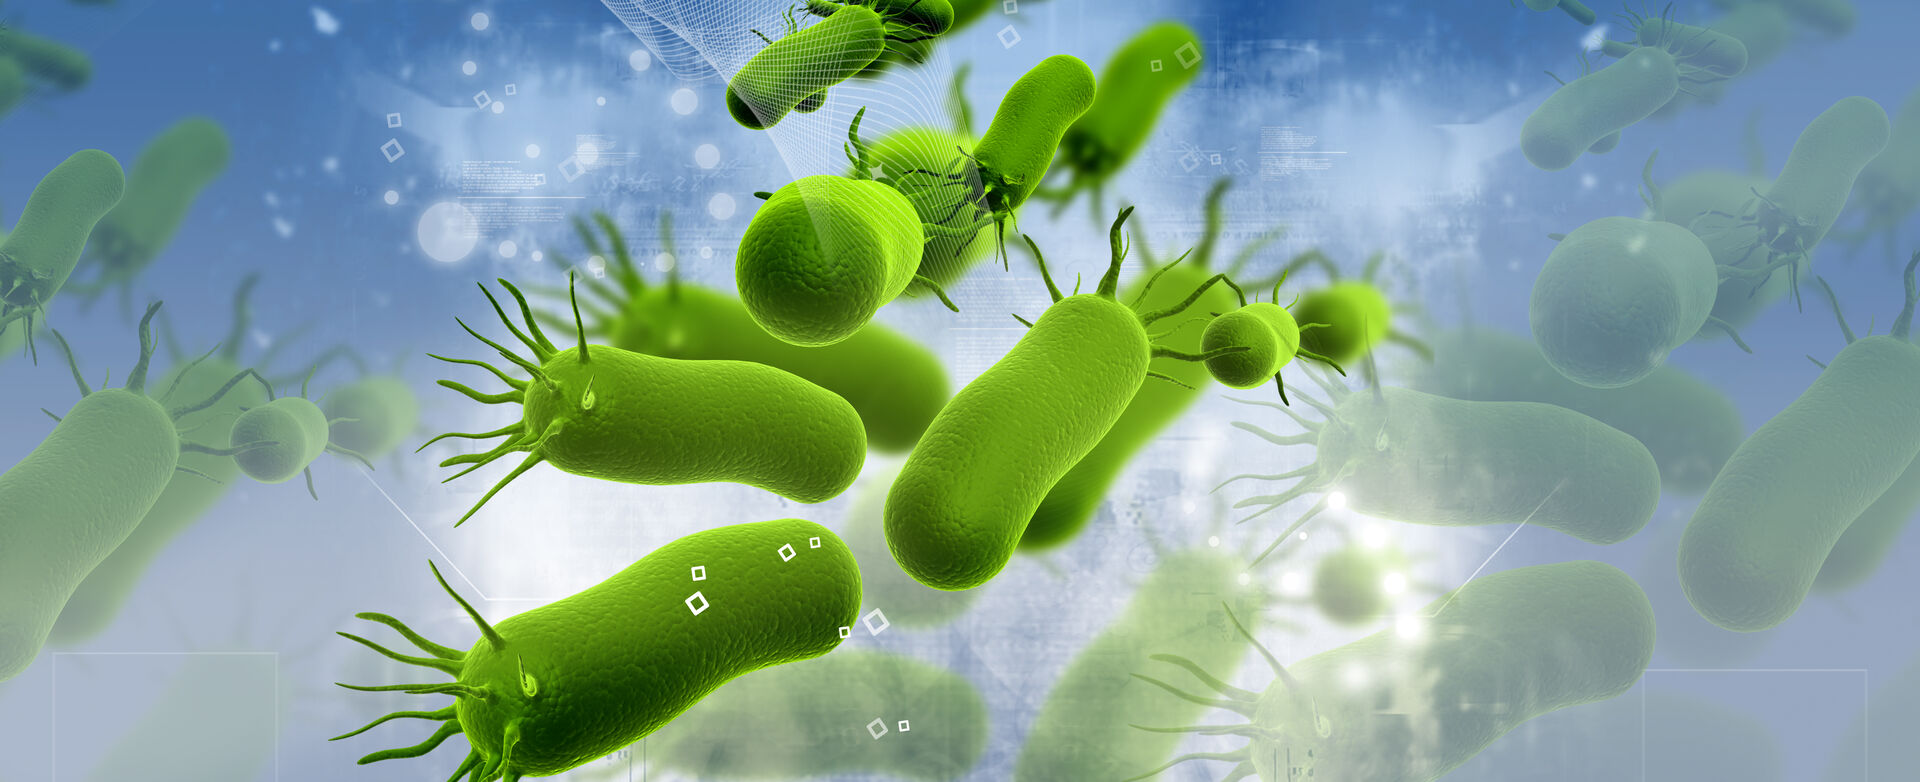 Image of green bacteria